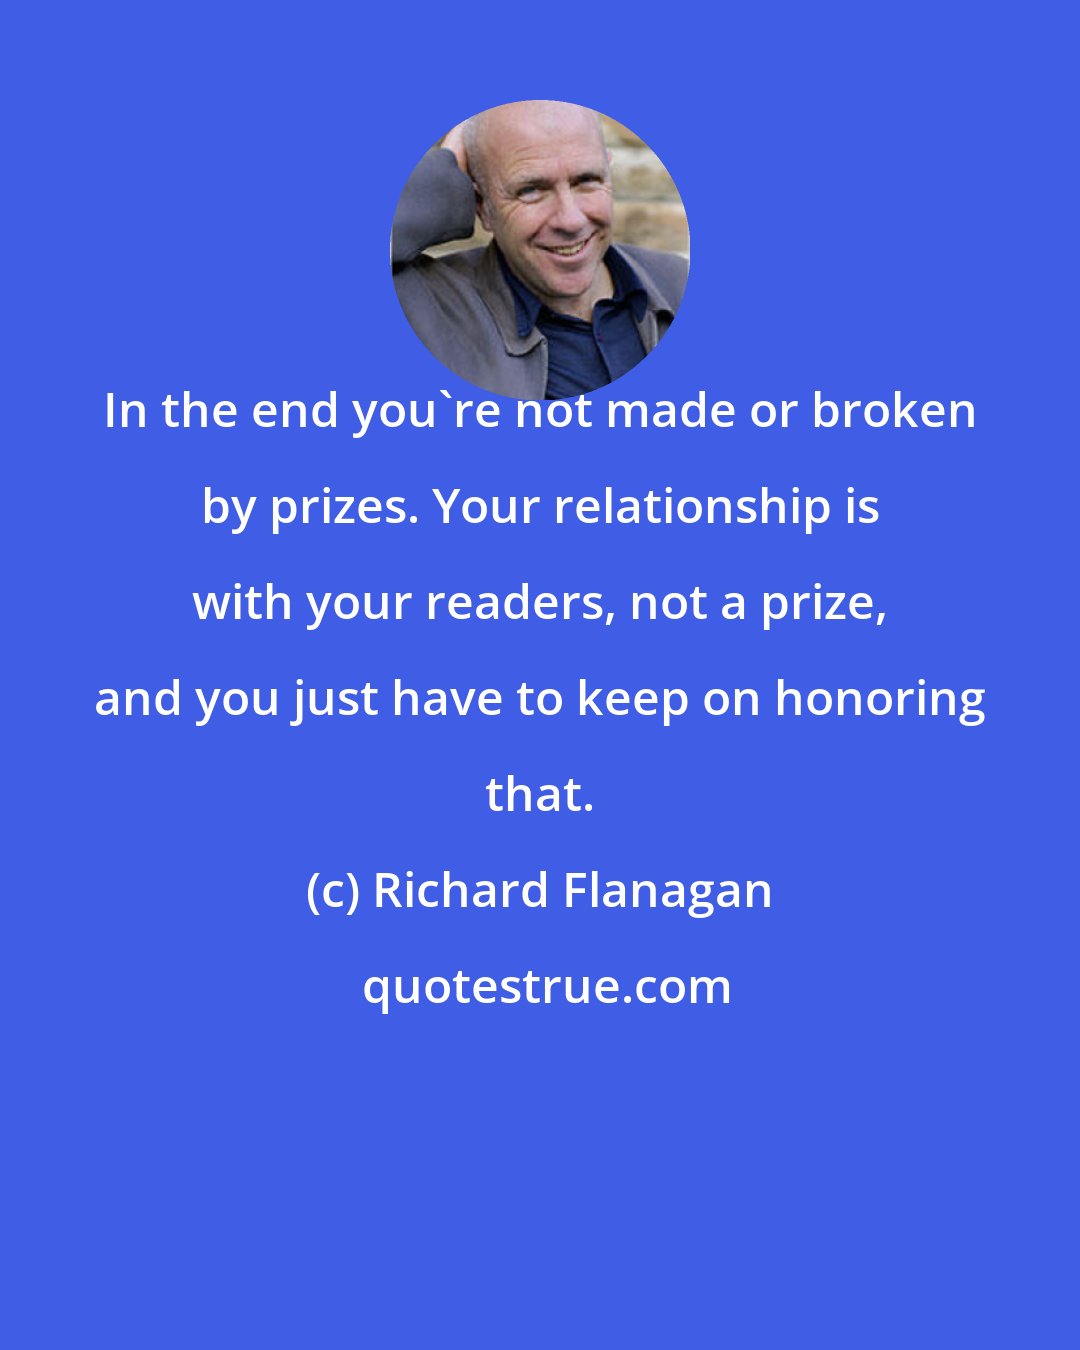 Richard Flanagan: In the end you're not made or broken by prizes. Your relationship is with your readers, not a prize, and you just have to keep on honoring that.